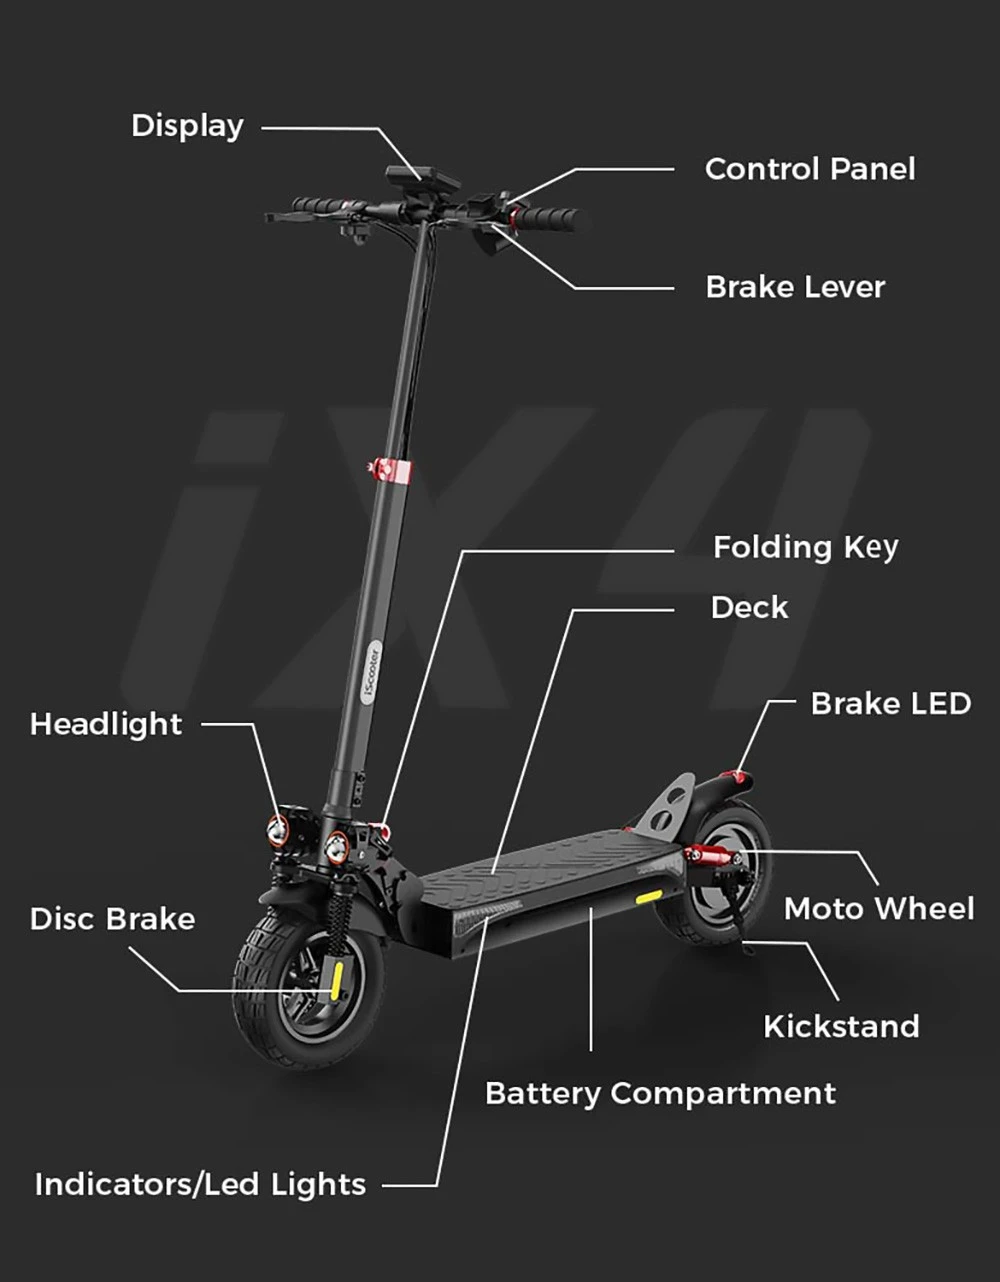 https://img.gkbcdn.com/d/202303/iScooter-IX4-Electric-Scooter-10---Honeycomb-Tires-519918-1._p1_.jpg